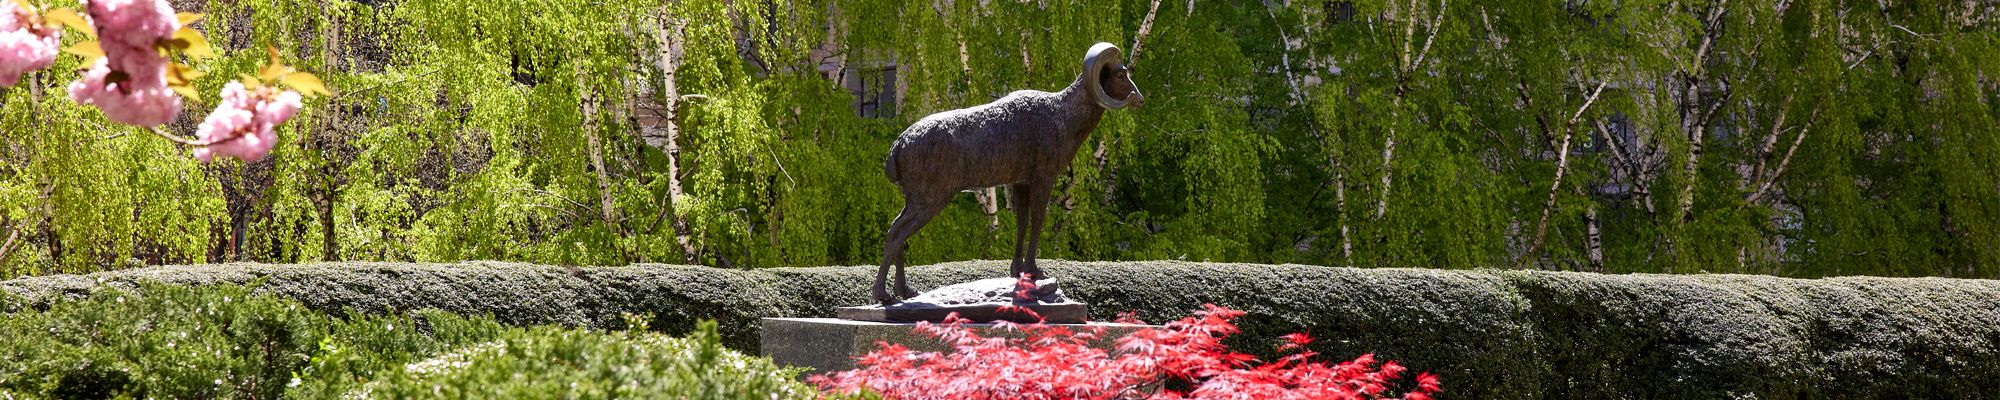 Fordham Ram on the Lincoln Center campus in spring with flowers in bloom